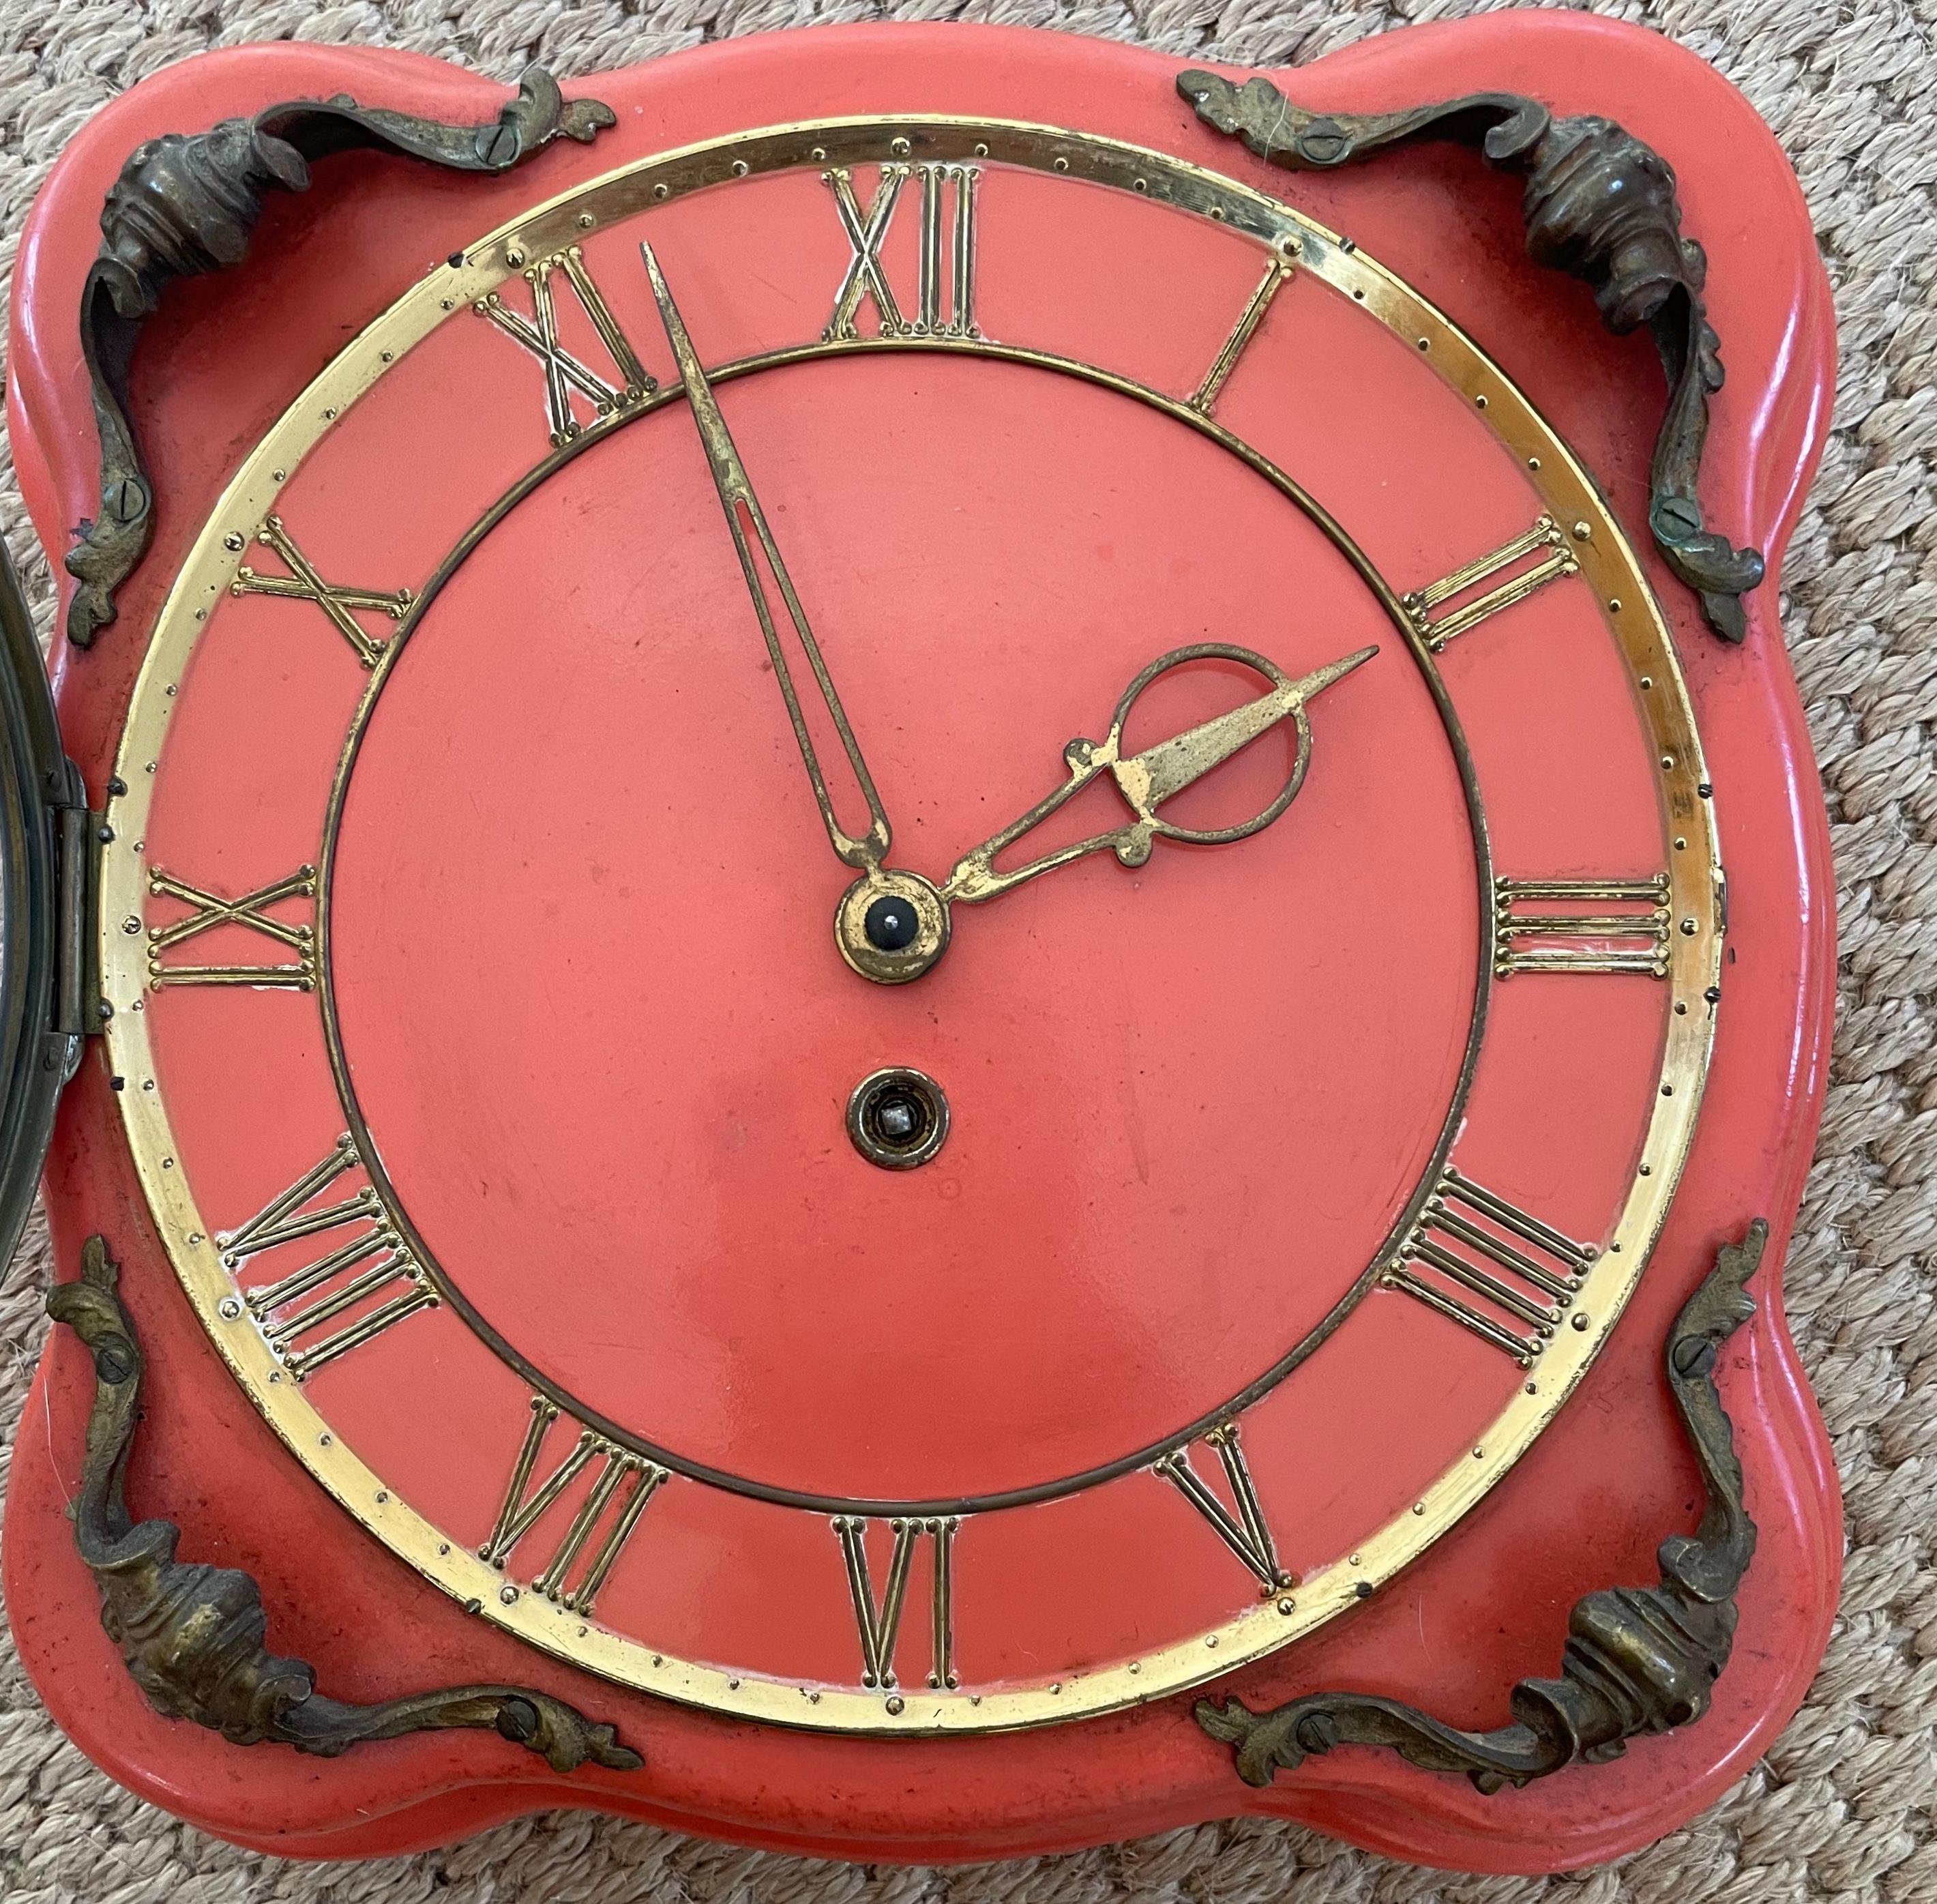 Italian red coral clock. Vintage forties coral enamel glazed clock with shaped border and brass roman numeral face with key for winding. Happily ticks away for 3 weeks. Italy circa 1940’s
Dimensions: 9